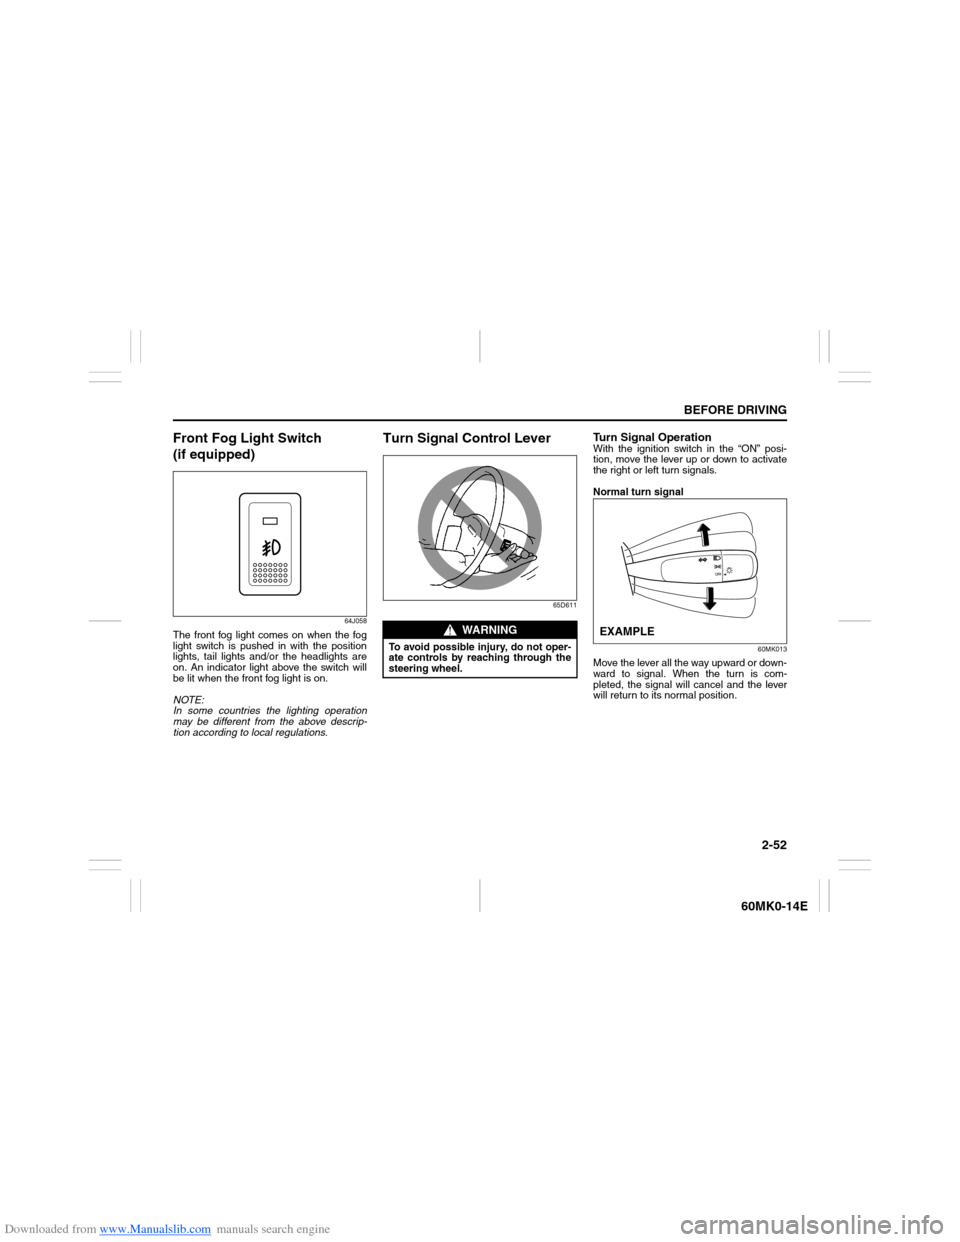 SUZUKI ERTIGA 2013 1.G Repair Manual Downloaded from www.Manualslib.com manuals search engine 2-52
BEFORE DRIVING
60MK0-14E
Front Fog Light Switch 
(if equipped)
64J058
The front fog light comes on when the fog
light switch is pushed in 